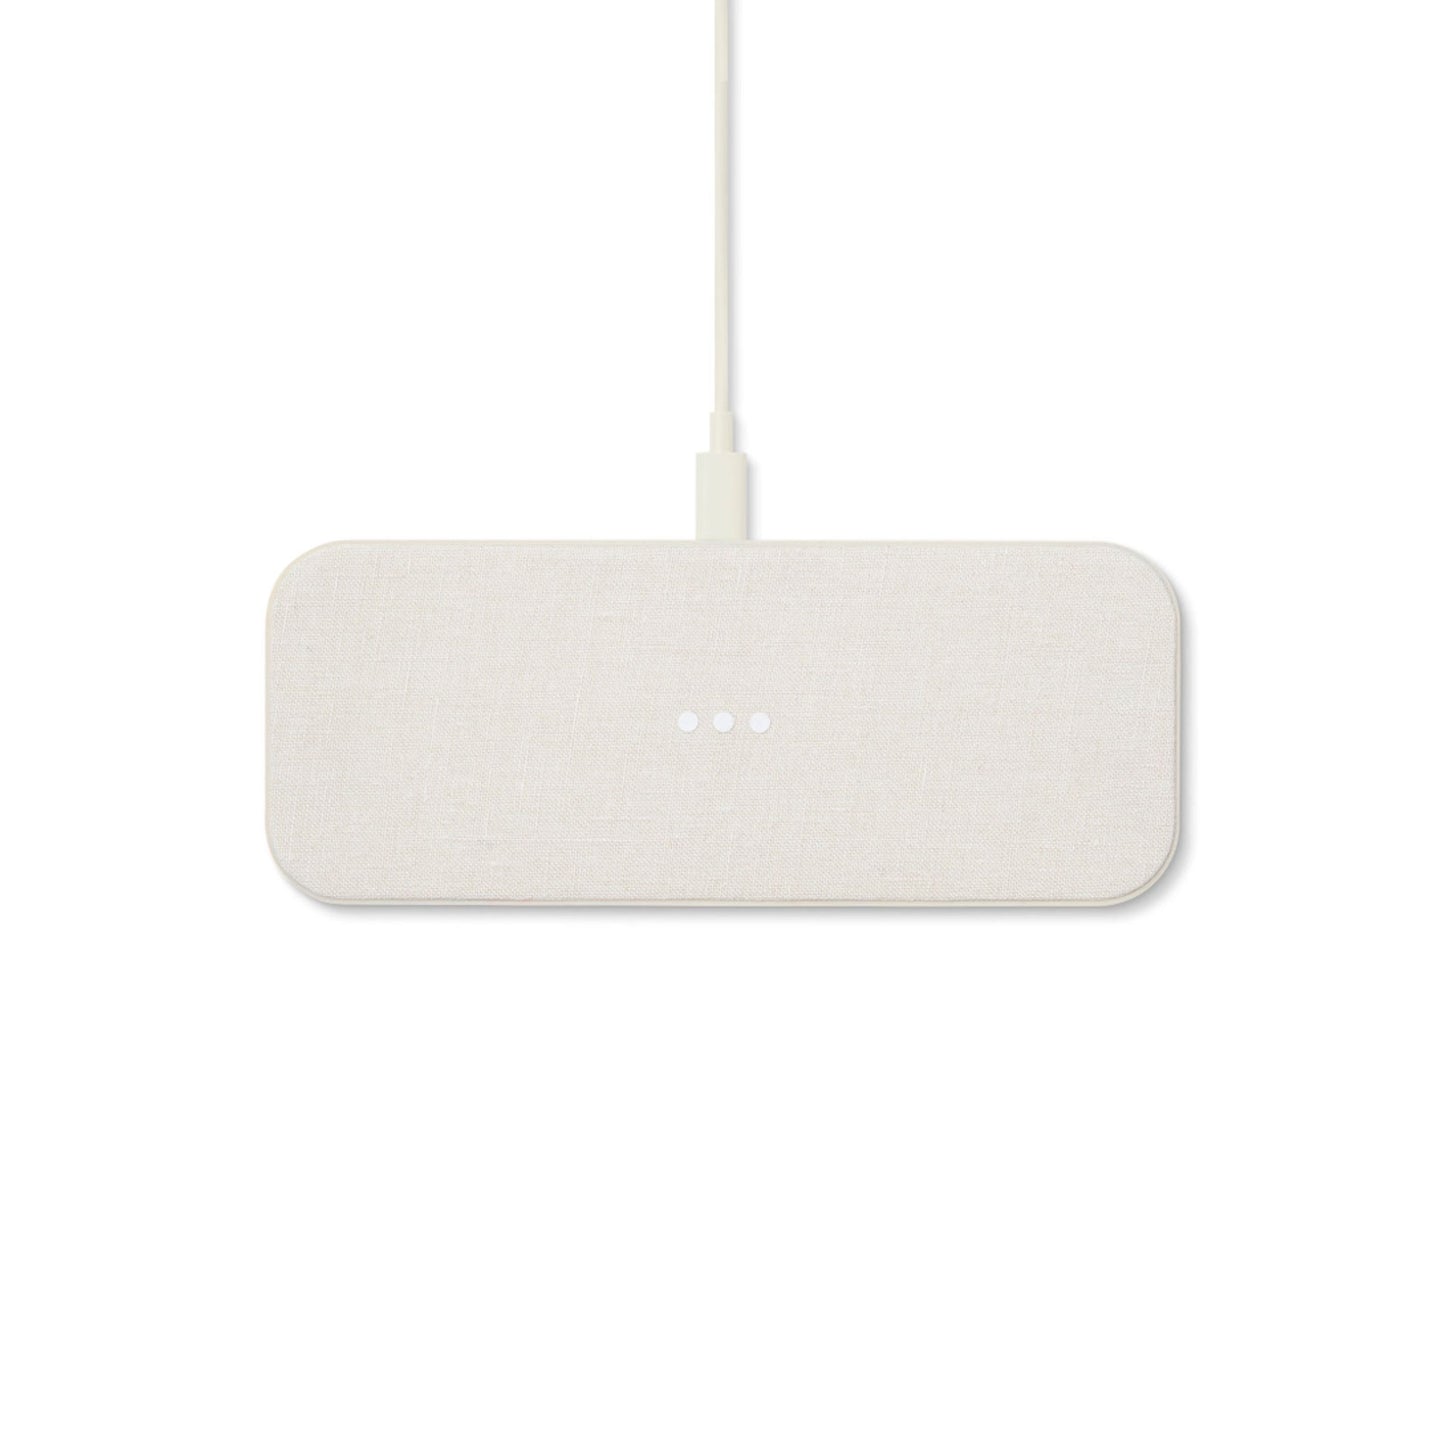 CATCH:2 Essentials Wireless Charger in Natural